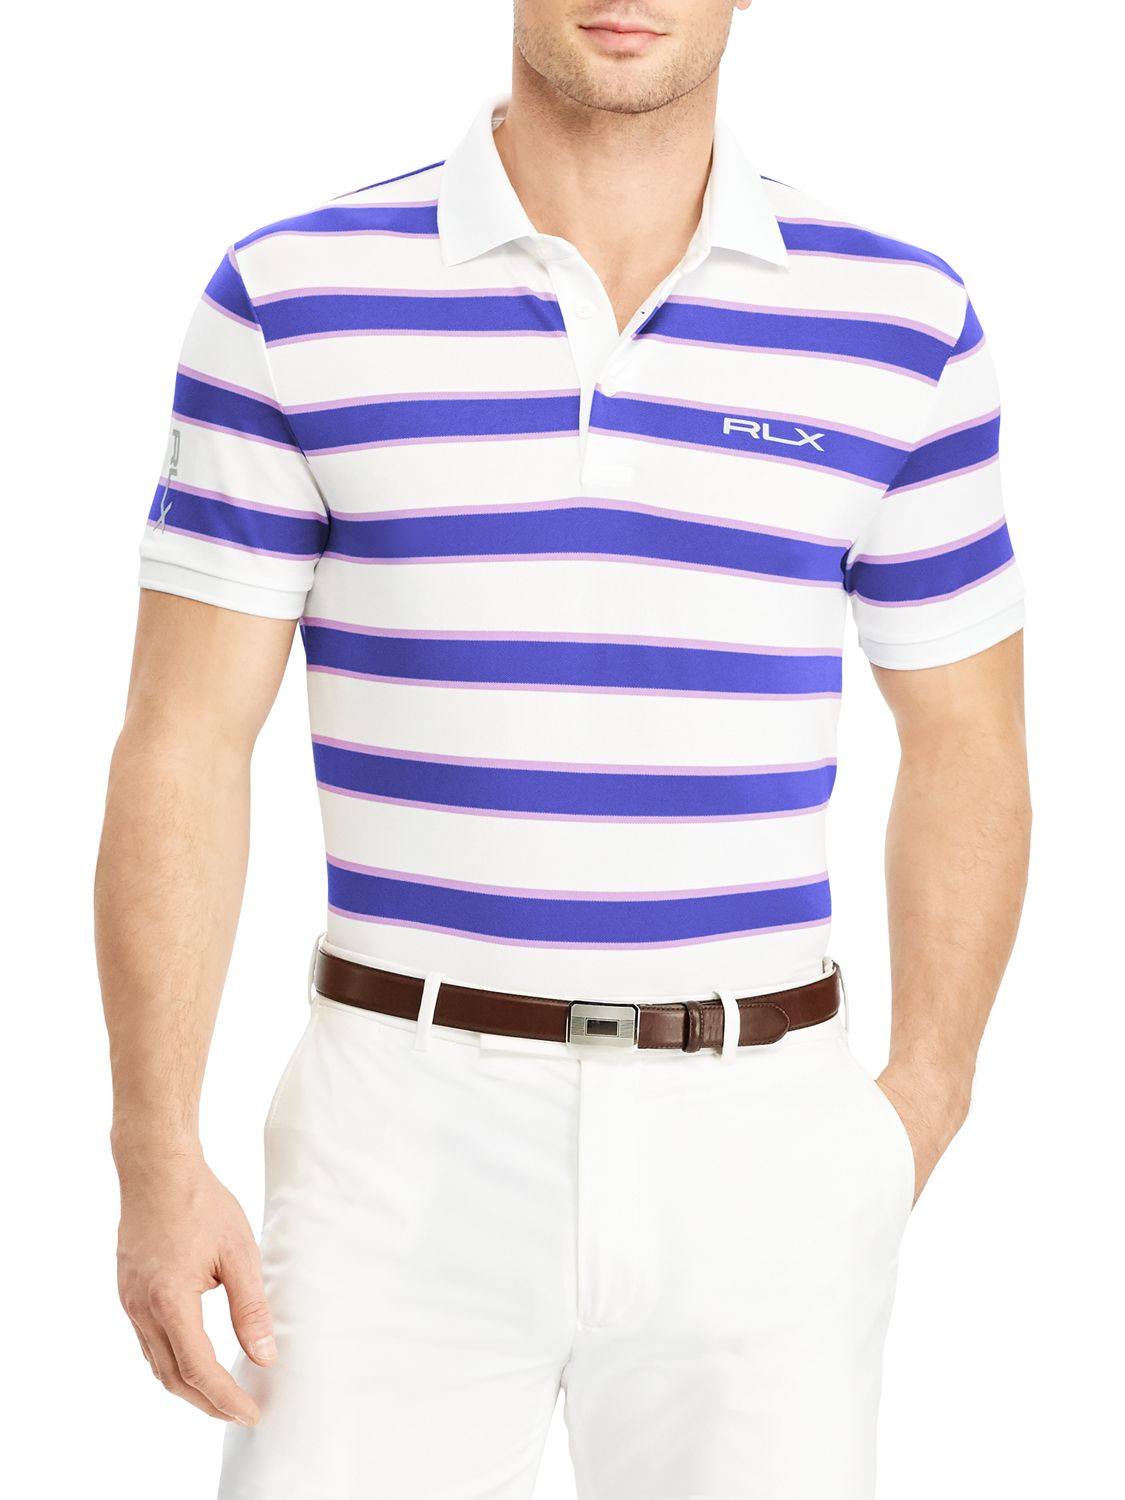 Polo Golf By Ralph Lauren Pro Fit Polo Shirt, Pure White Multi